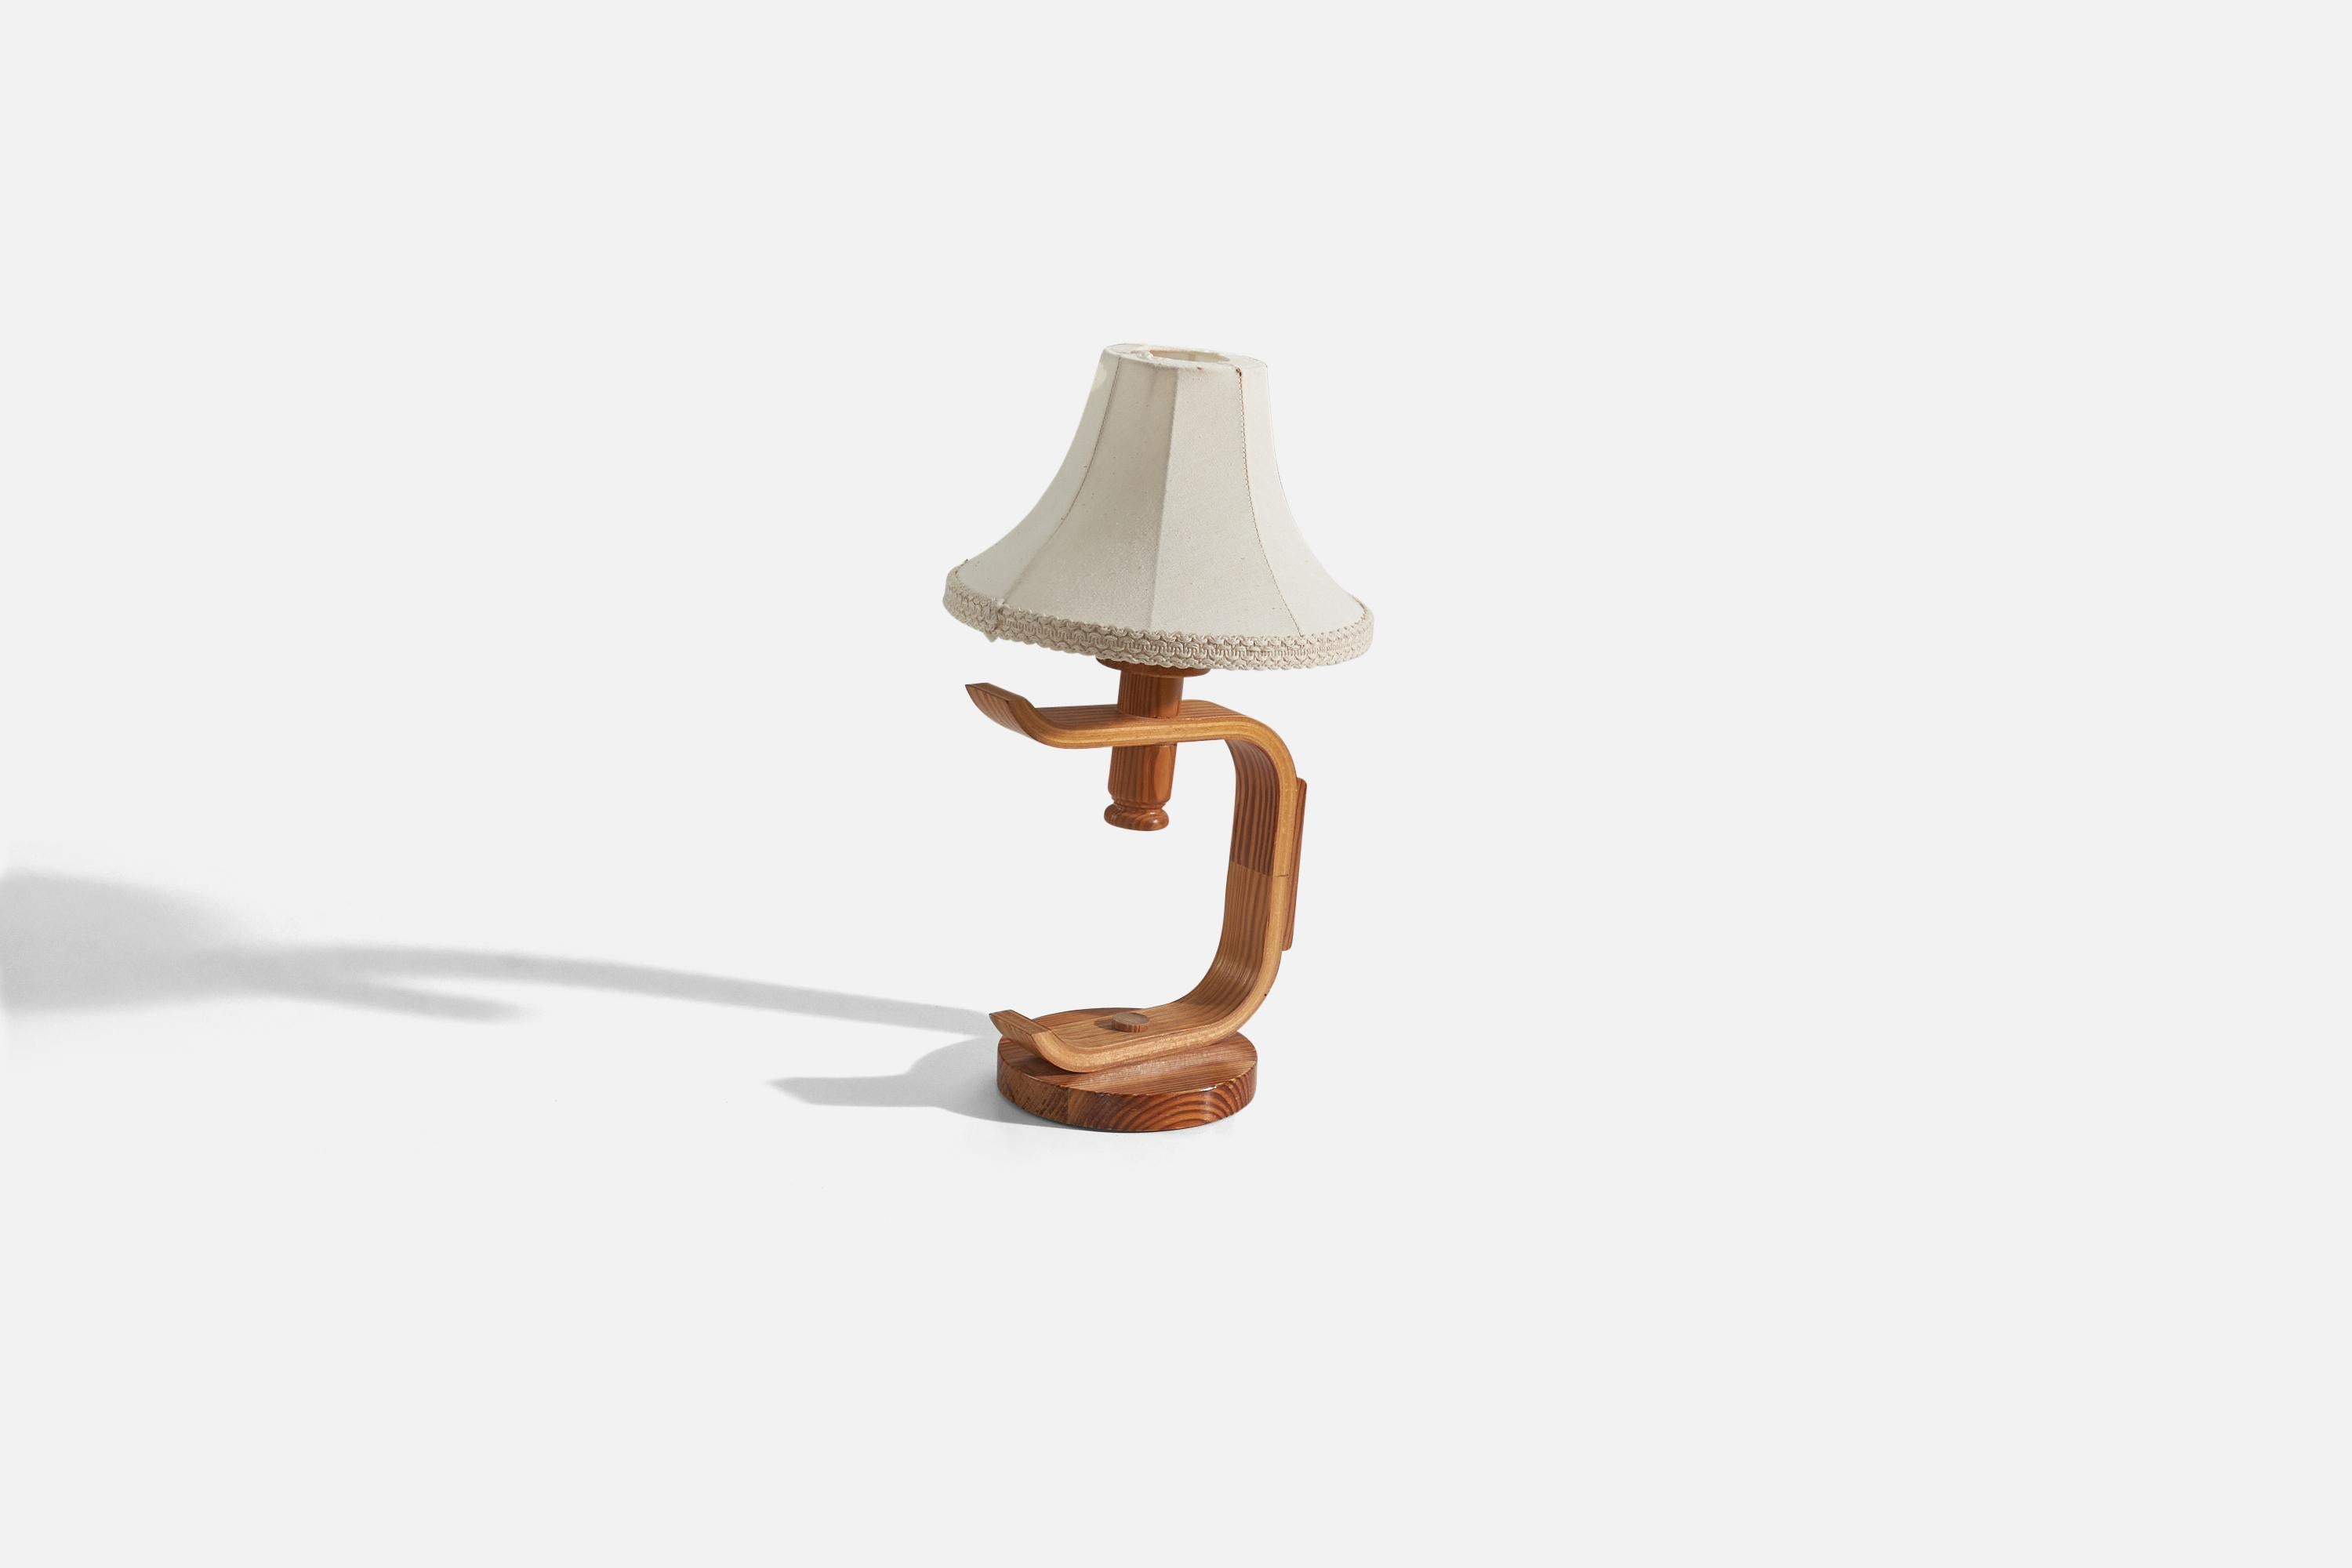 A pine table lamp designed and produced in Sweden, c. 1970s.

Sold with fabric lampshade. 
Stated dimensions refer to the table lamp with the lampshade.